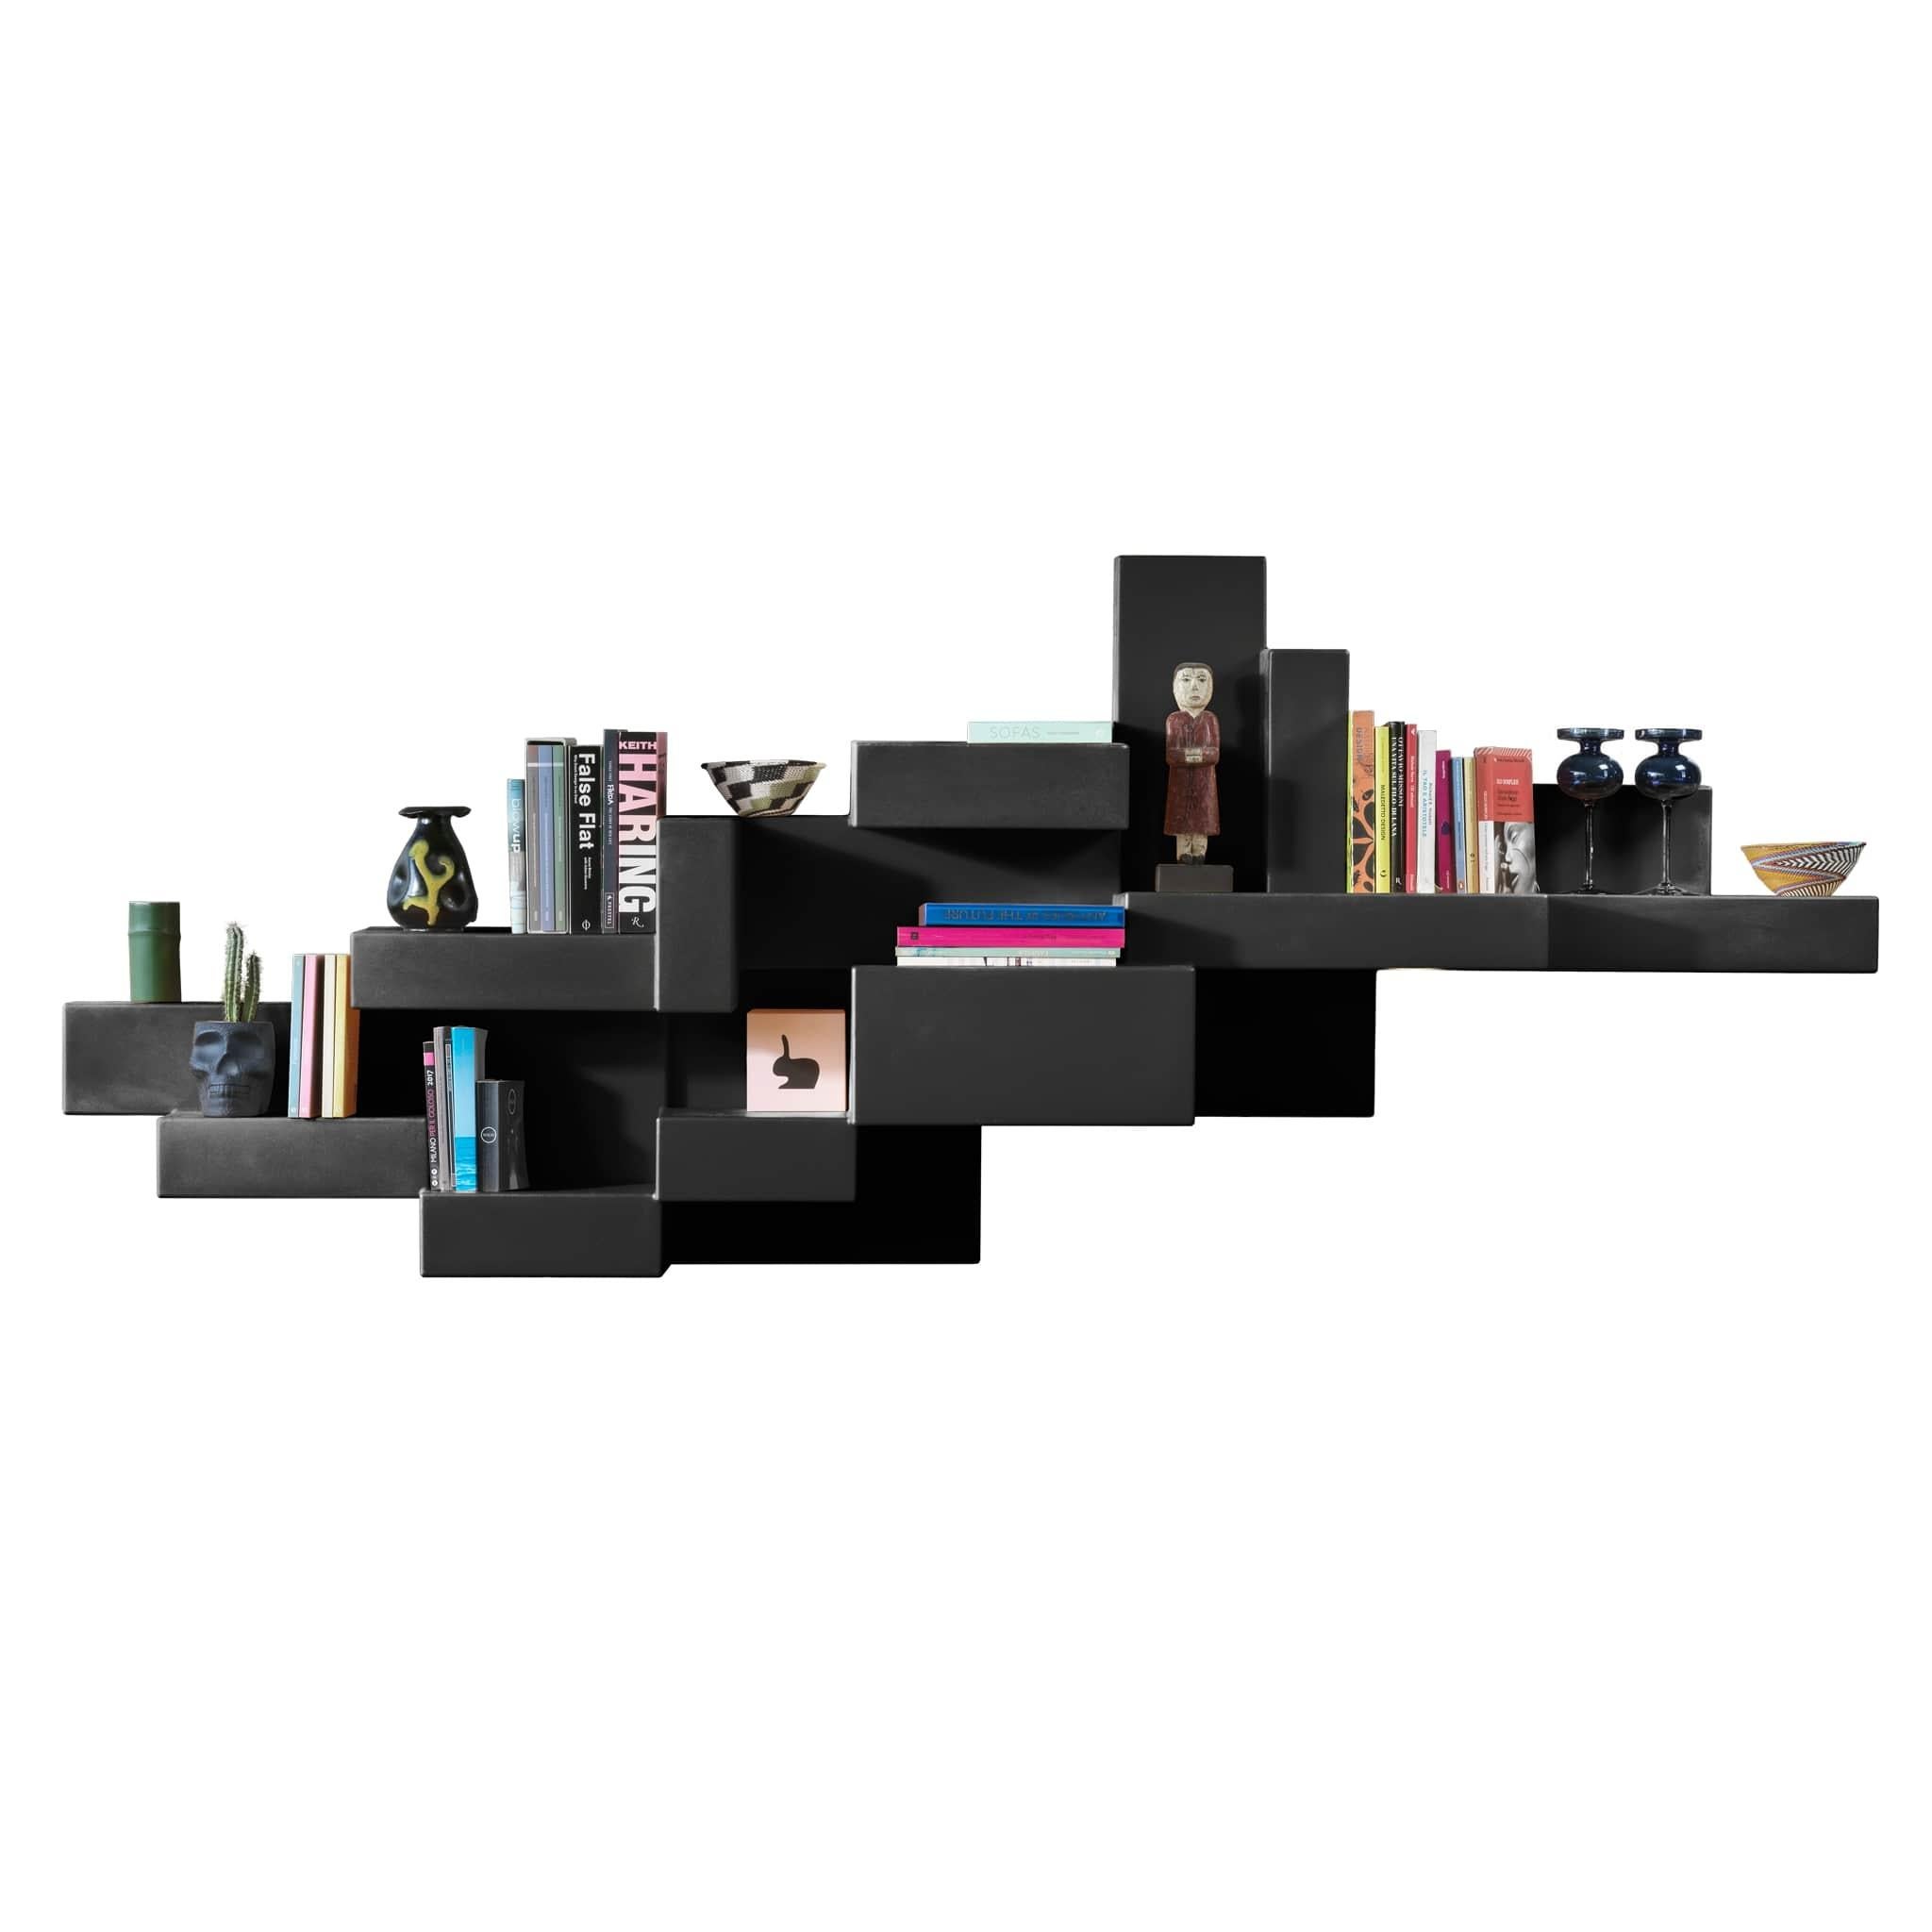 The Primitive bookshelf was one of the strongest and most iconic products designed by Studio Nucleo. Initially made as a limited-edition product, this bookshelf is now industrialized by Qeeboo and re-proposed in a polyethylene version with